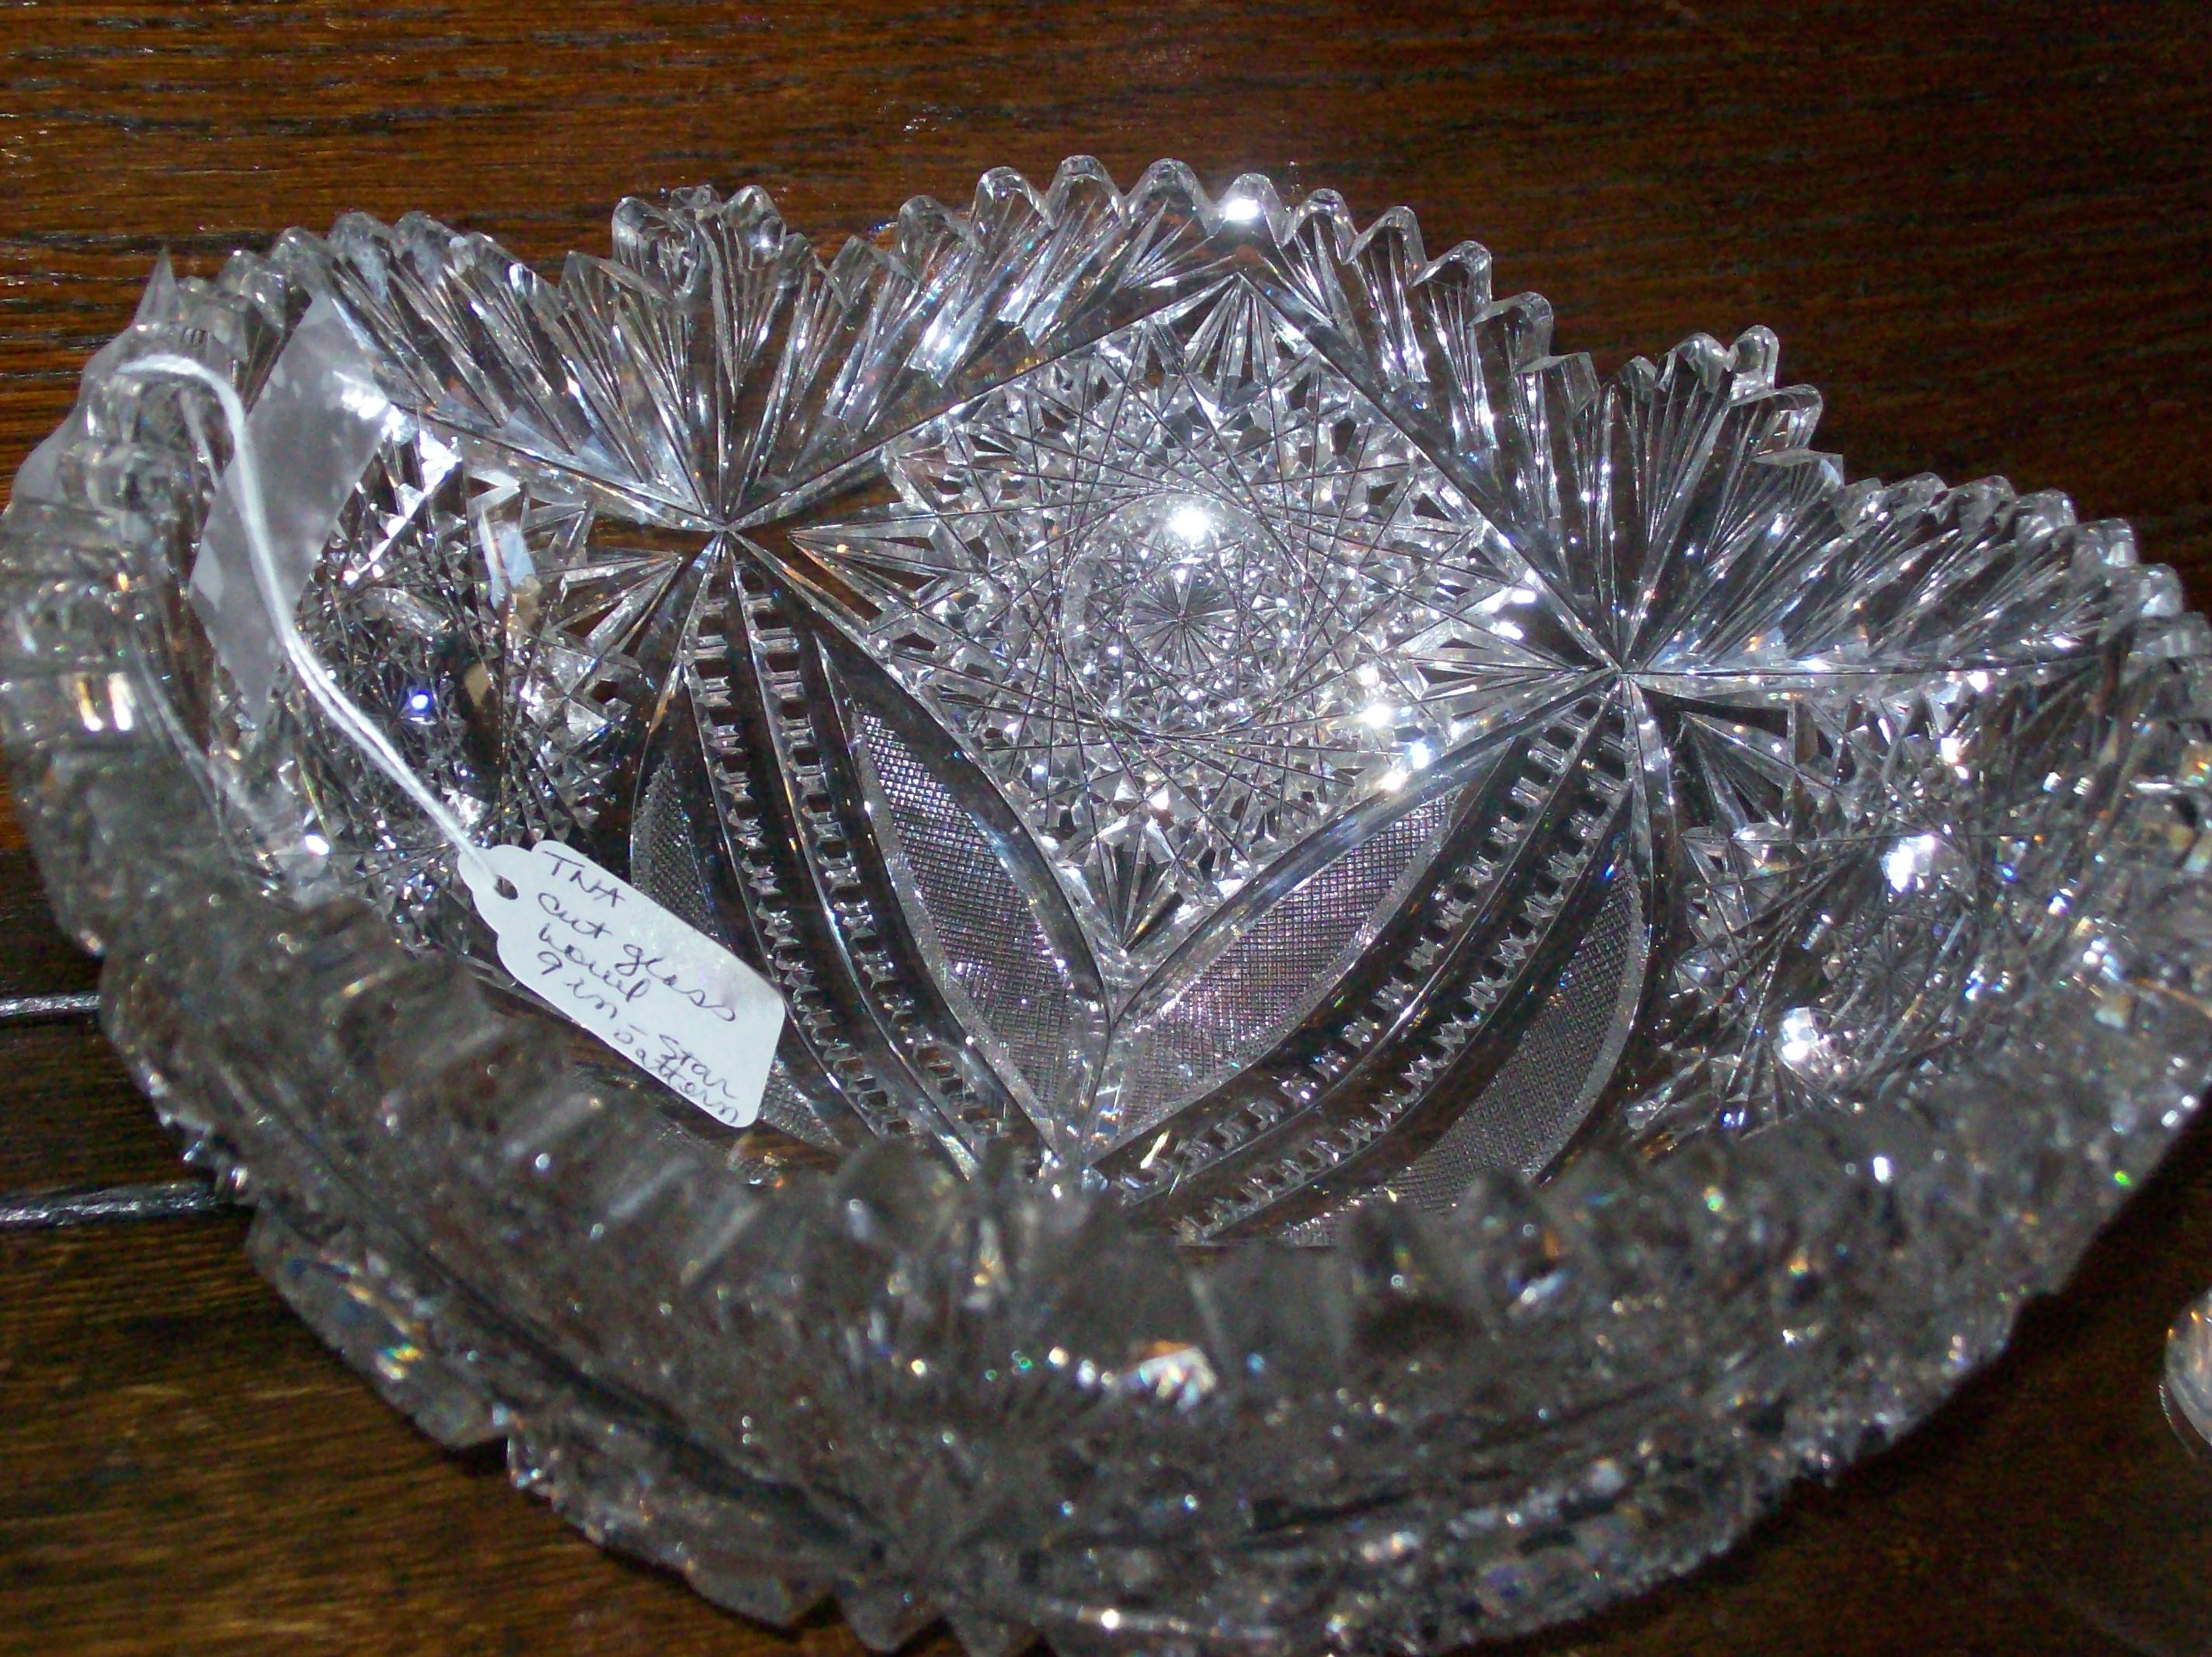 20 Elegant Waterford Crystal Vase Markings 2024 free download waterford crystal vase markings of janvier road where old becomes exciting and new sharing what i intended for 9 star pattern american brilliant bowl photo courtesy of treehouse antiques